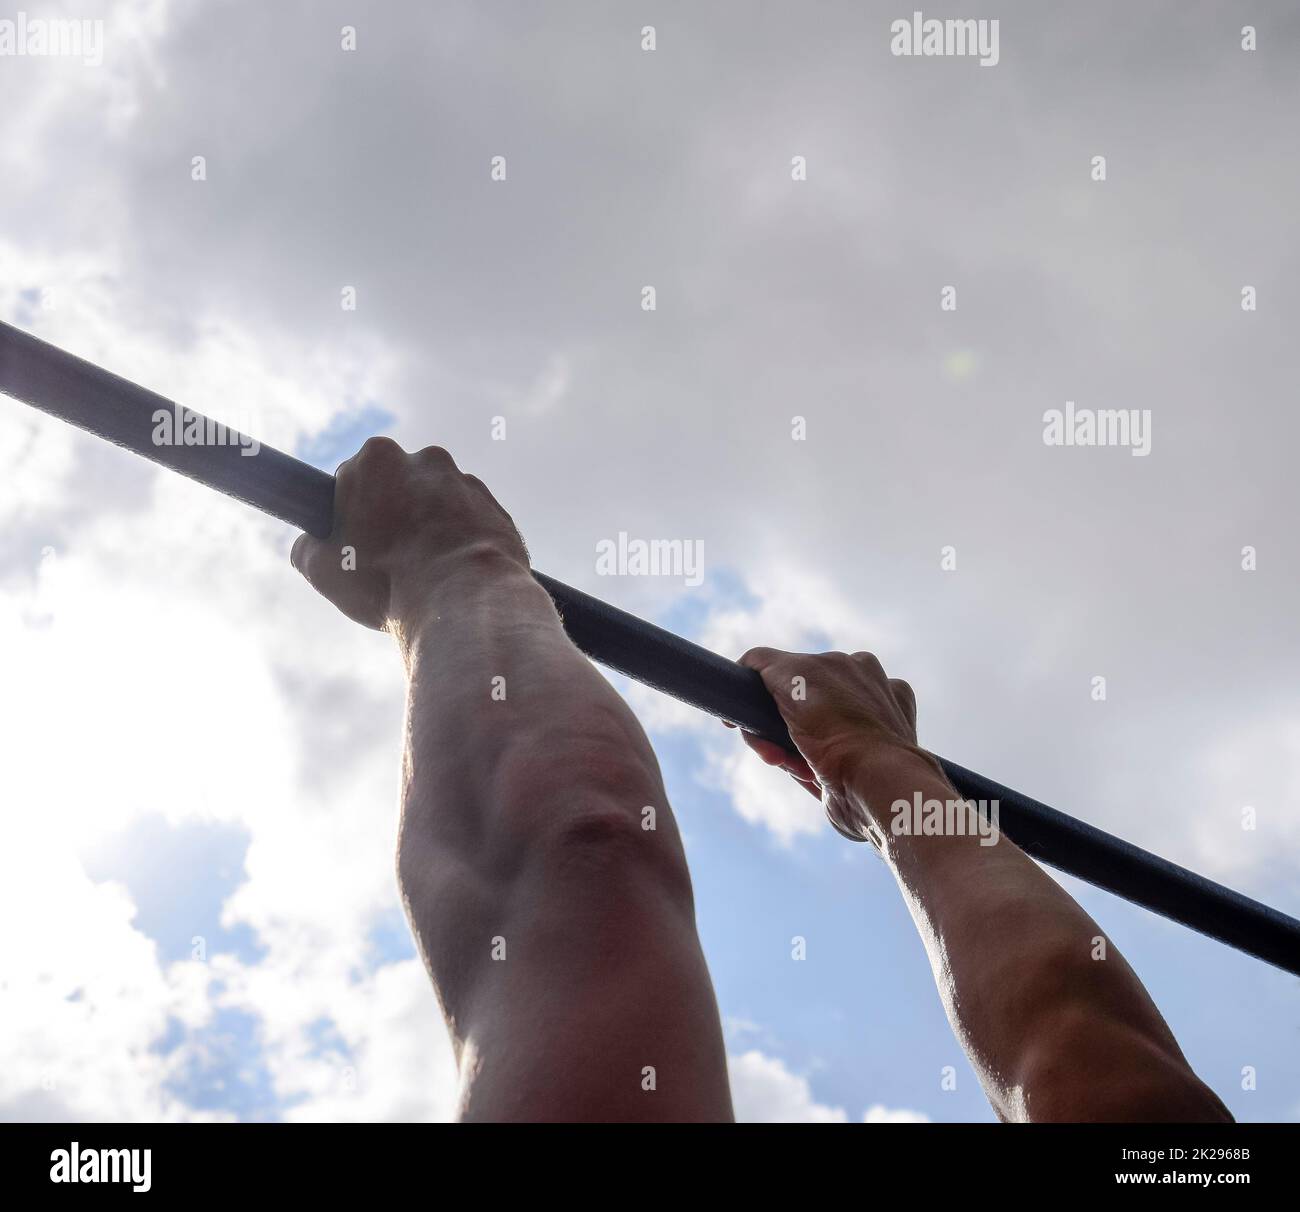 Hands on the bar close-up. The man pulls himself up on the bar. Playing sports in the fresh air. Horizontal bar. Stock Photo